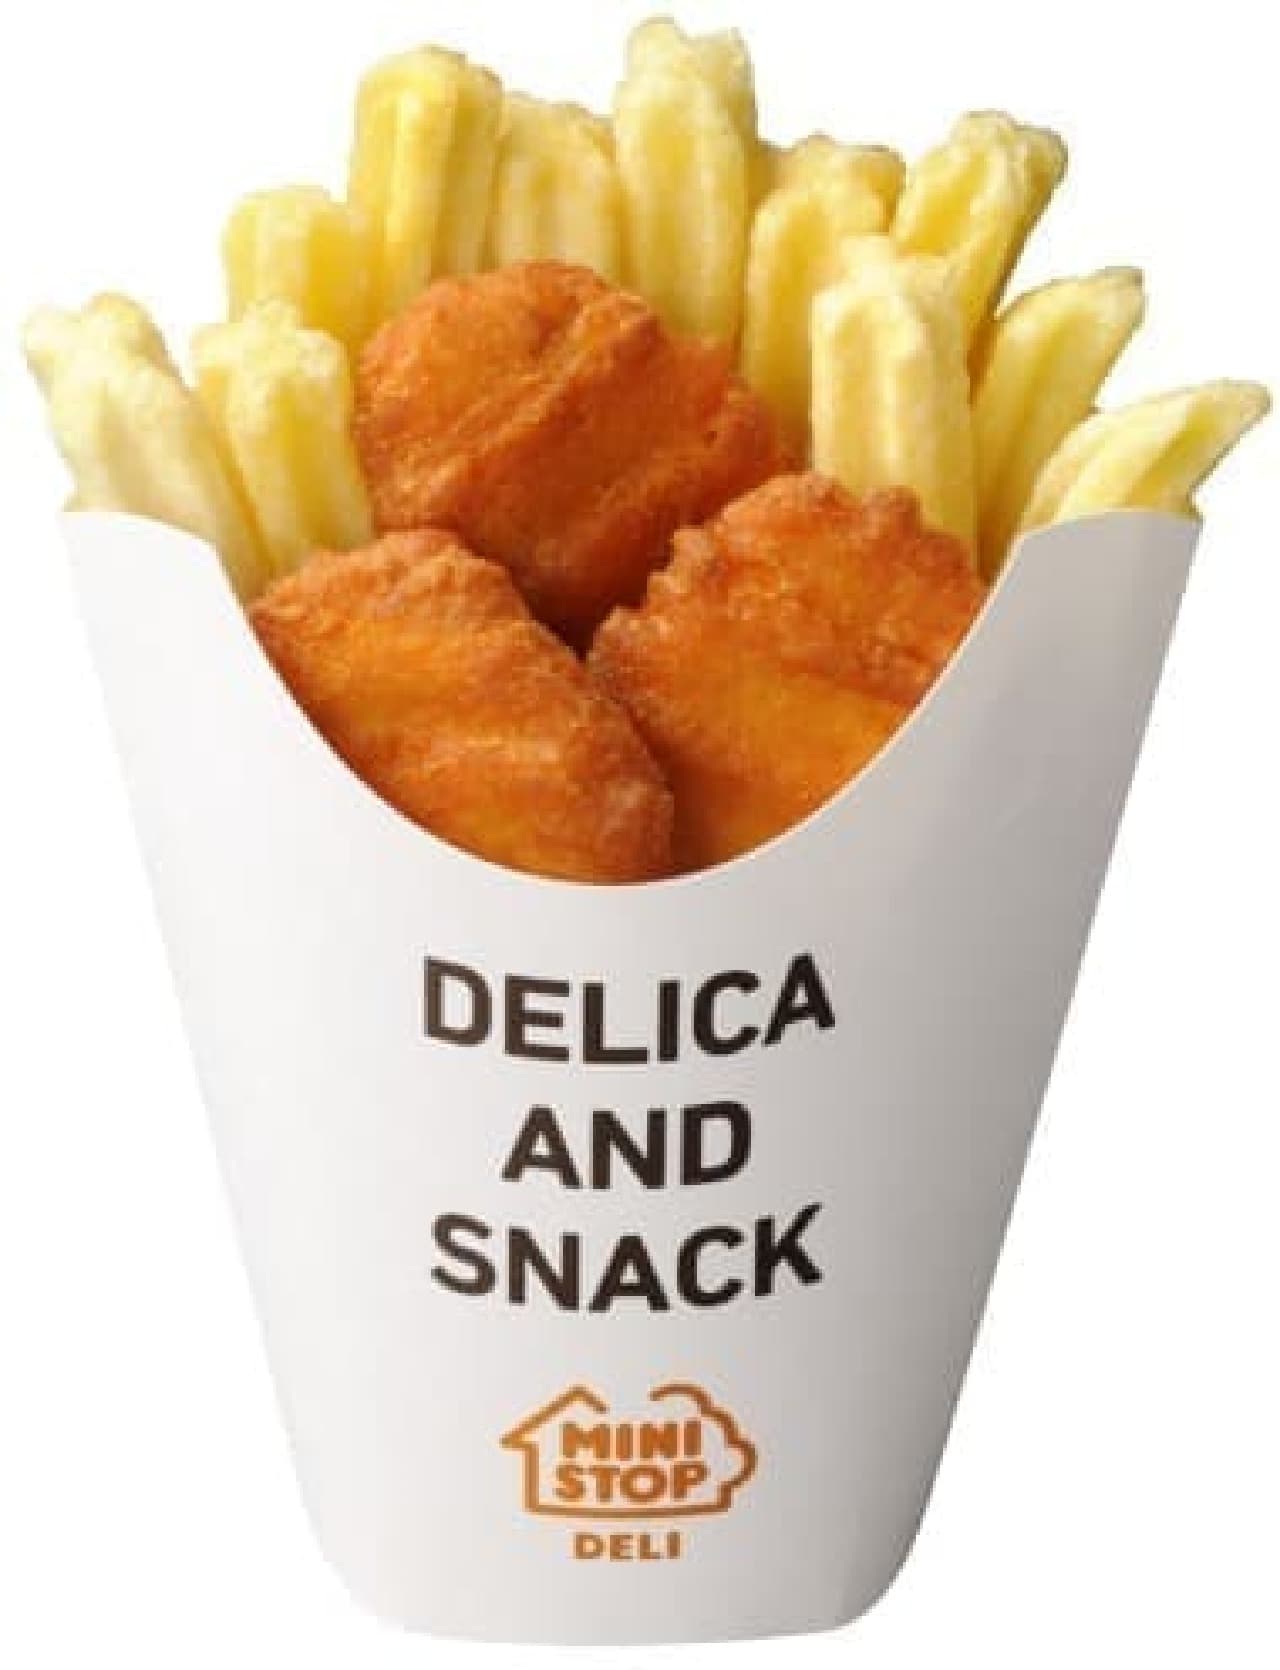 Ministop "Chicken & Chips (Menta Cheese in)"